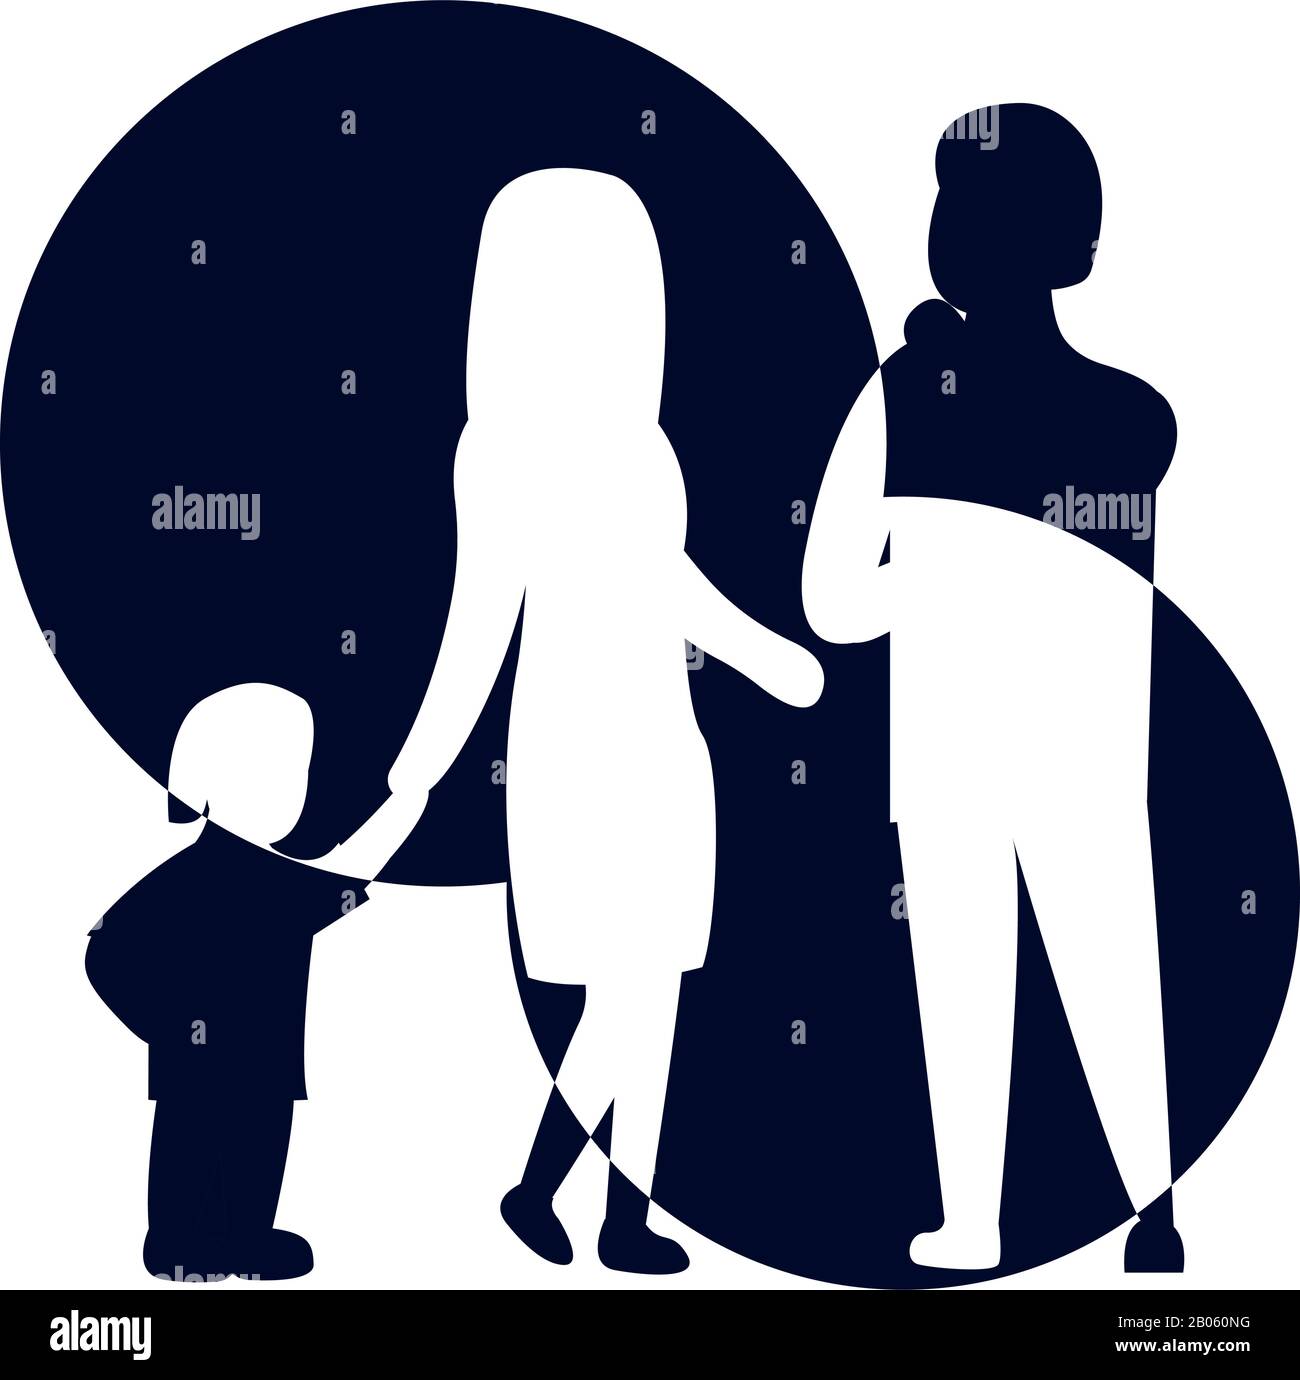 Vector illustration of a silhouette of a family. Happy family icon art in simple figures. Children, dad and mom stand together. Vector can be used as Stock Vector